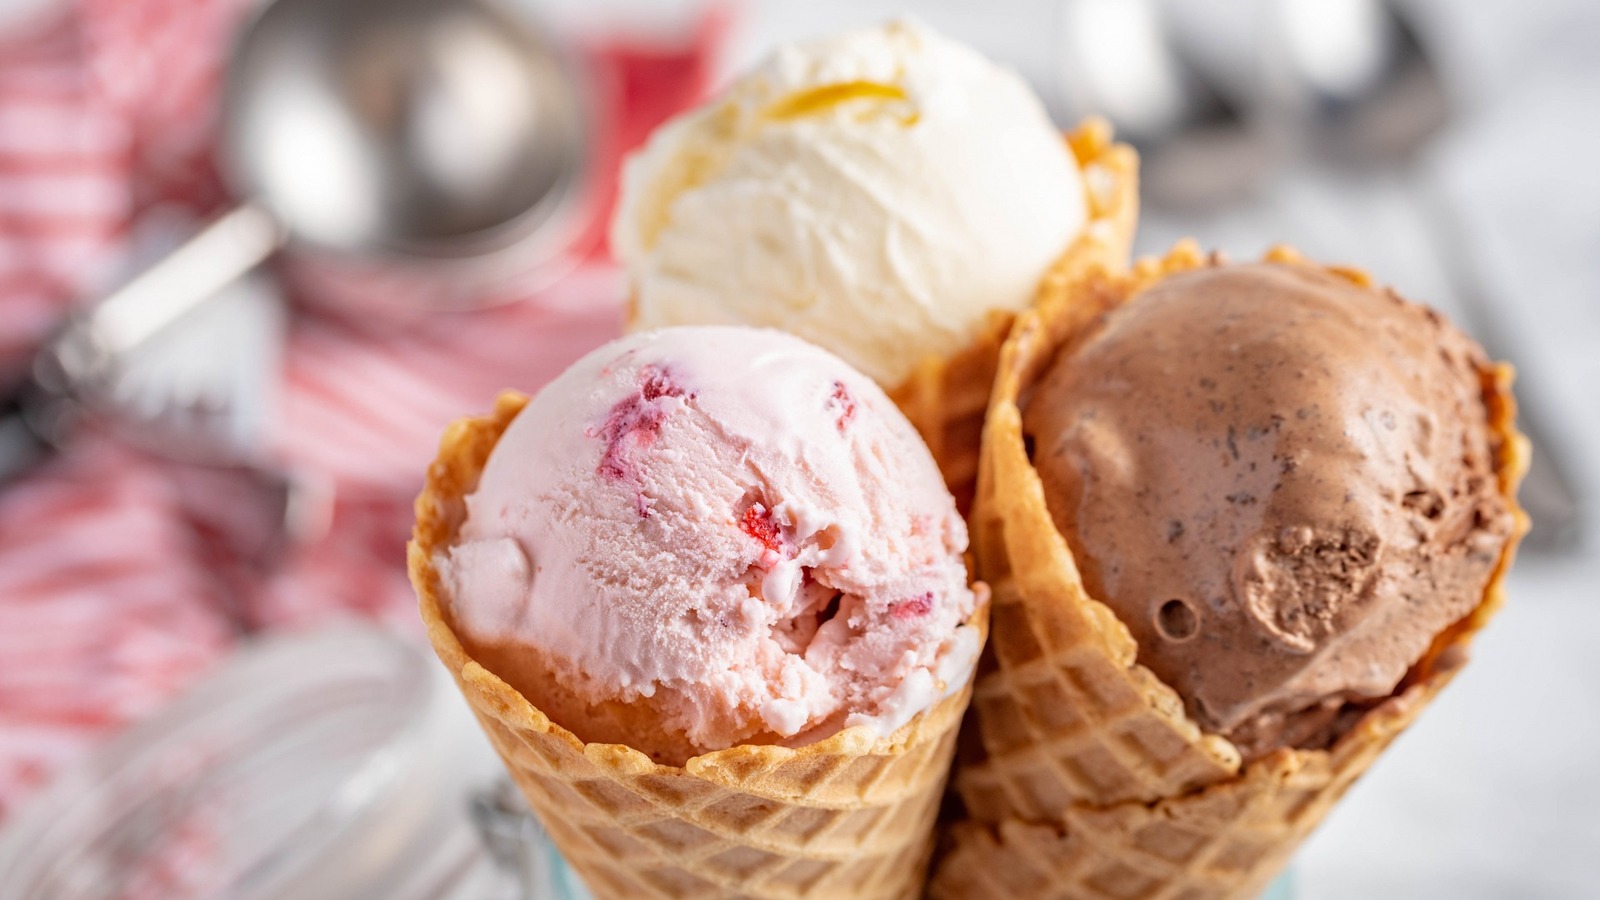 The Subtle Secrets to Making the Best Ice Cream Mix-Ins